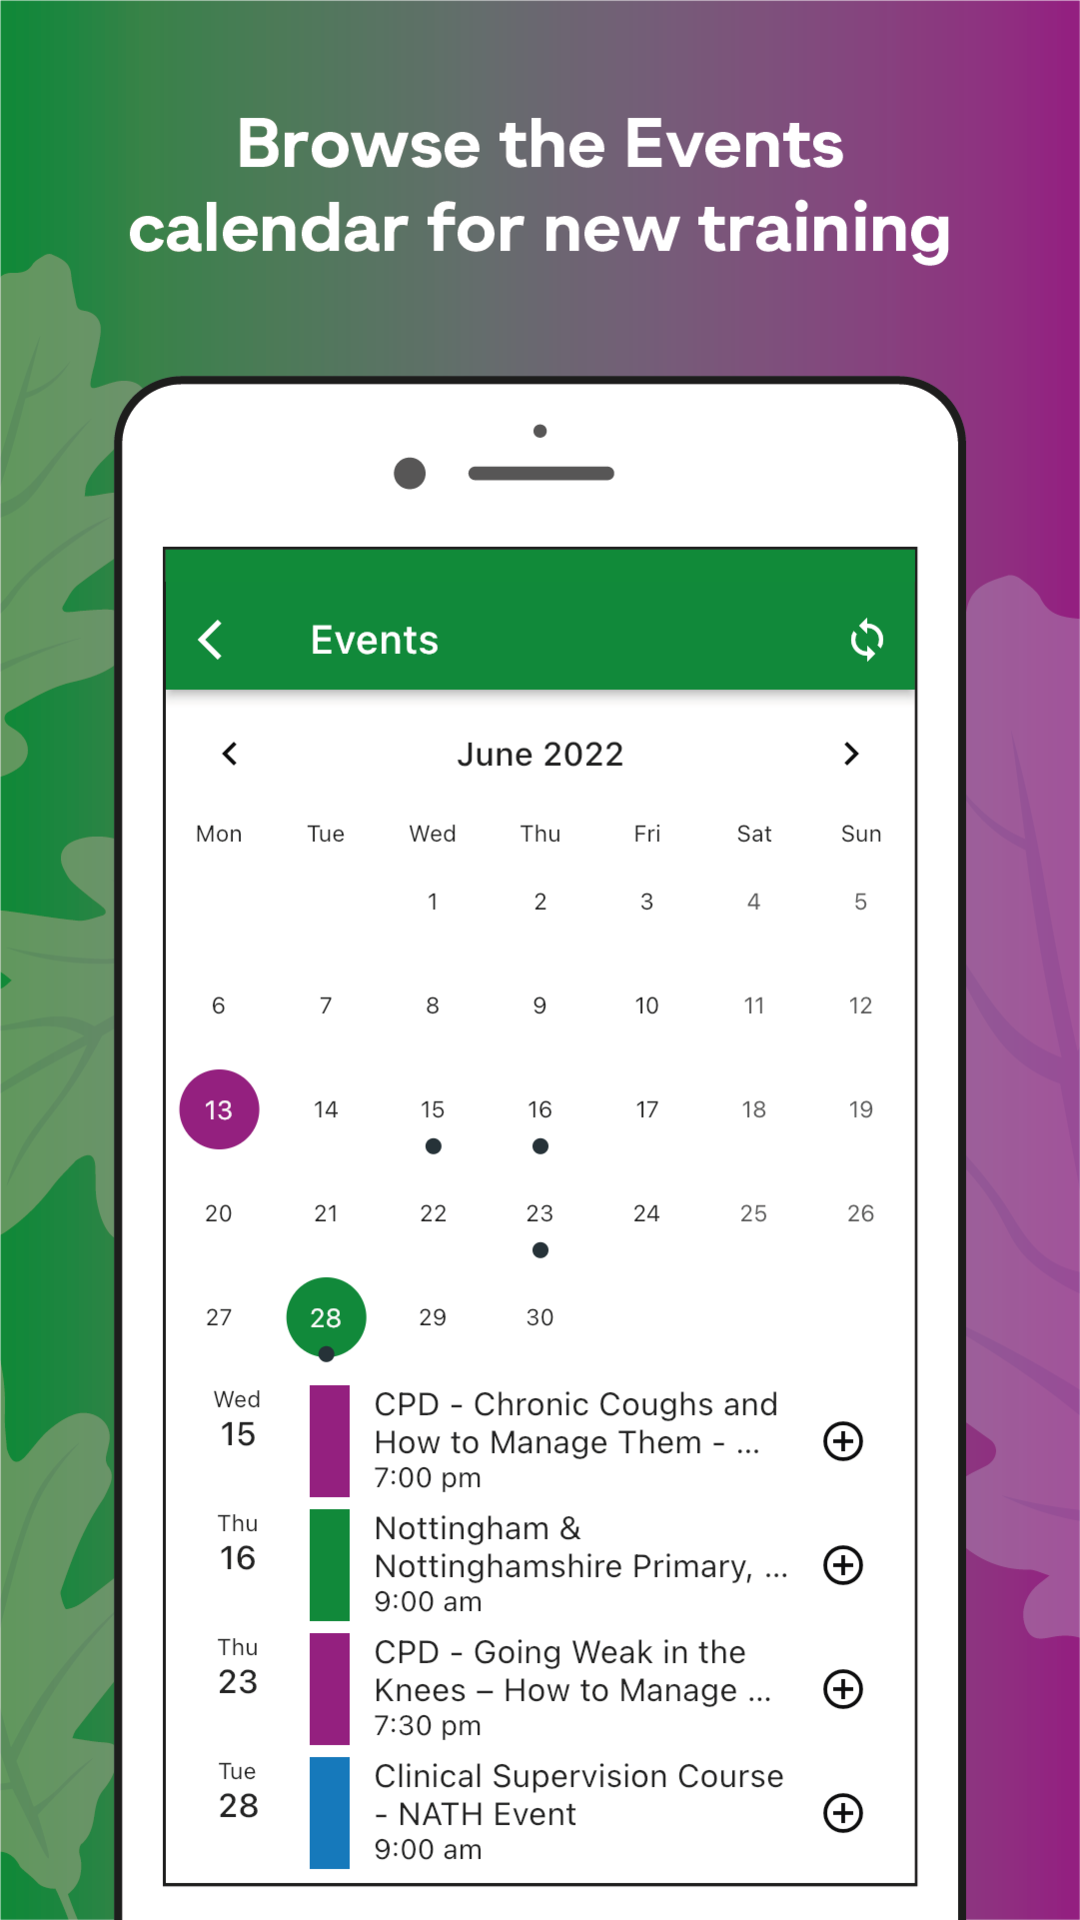 Browse the Events calendar for new training